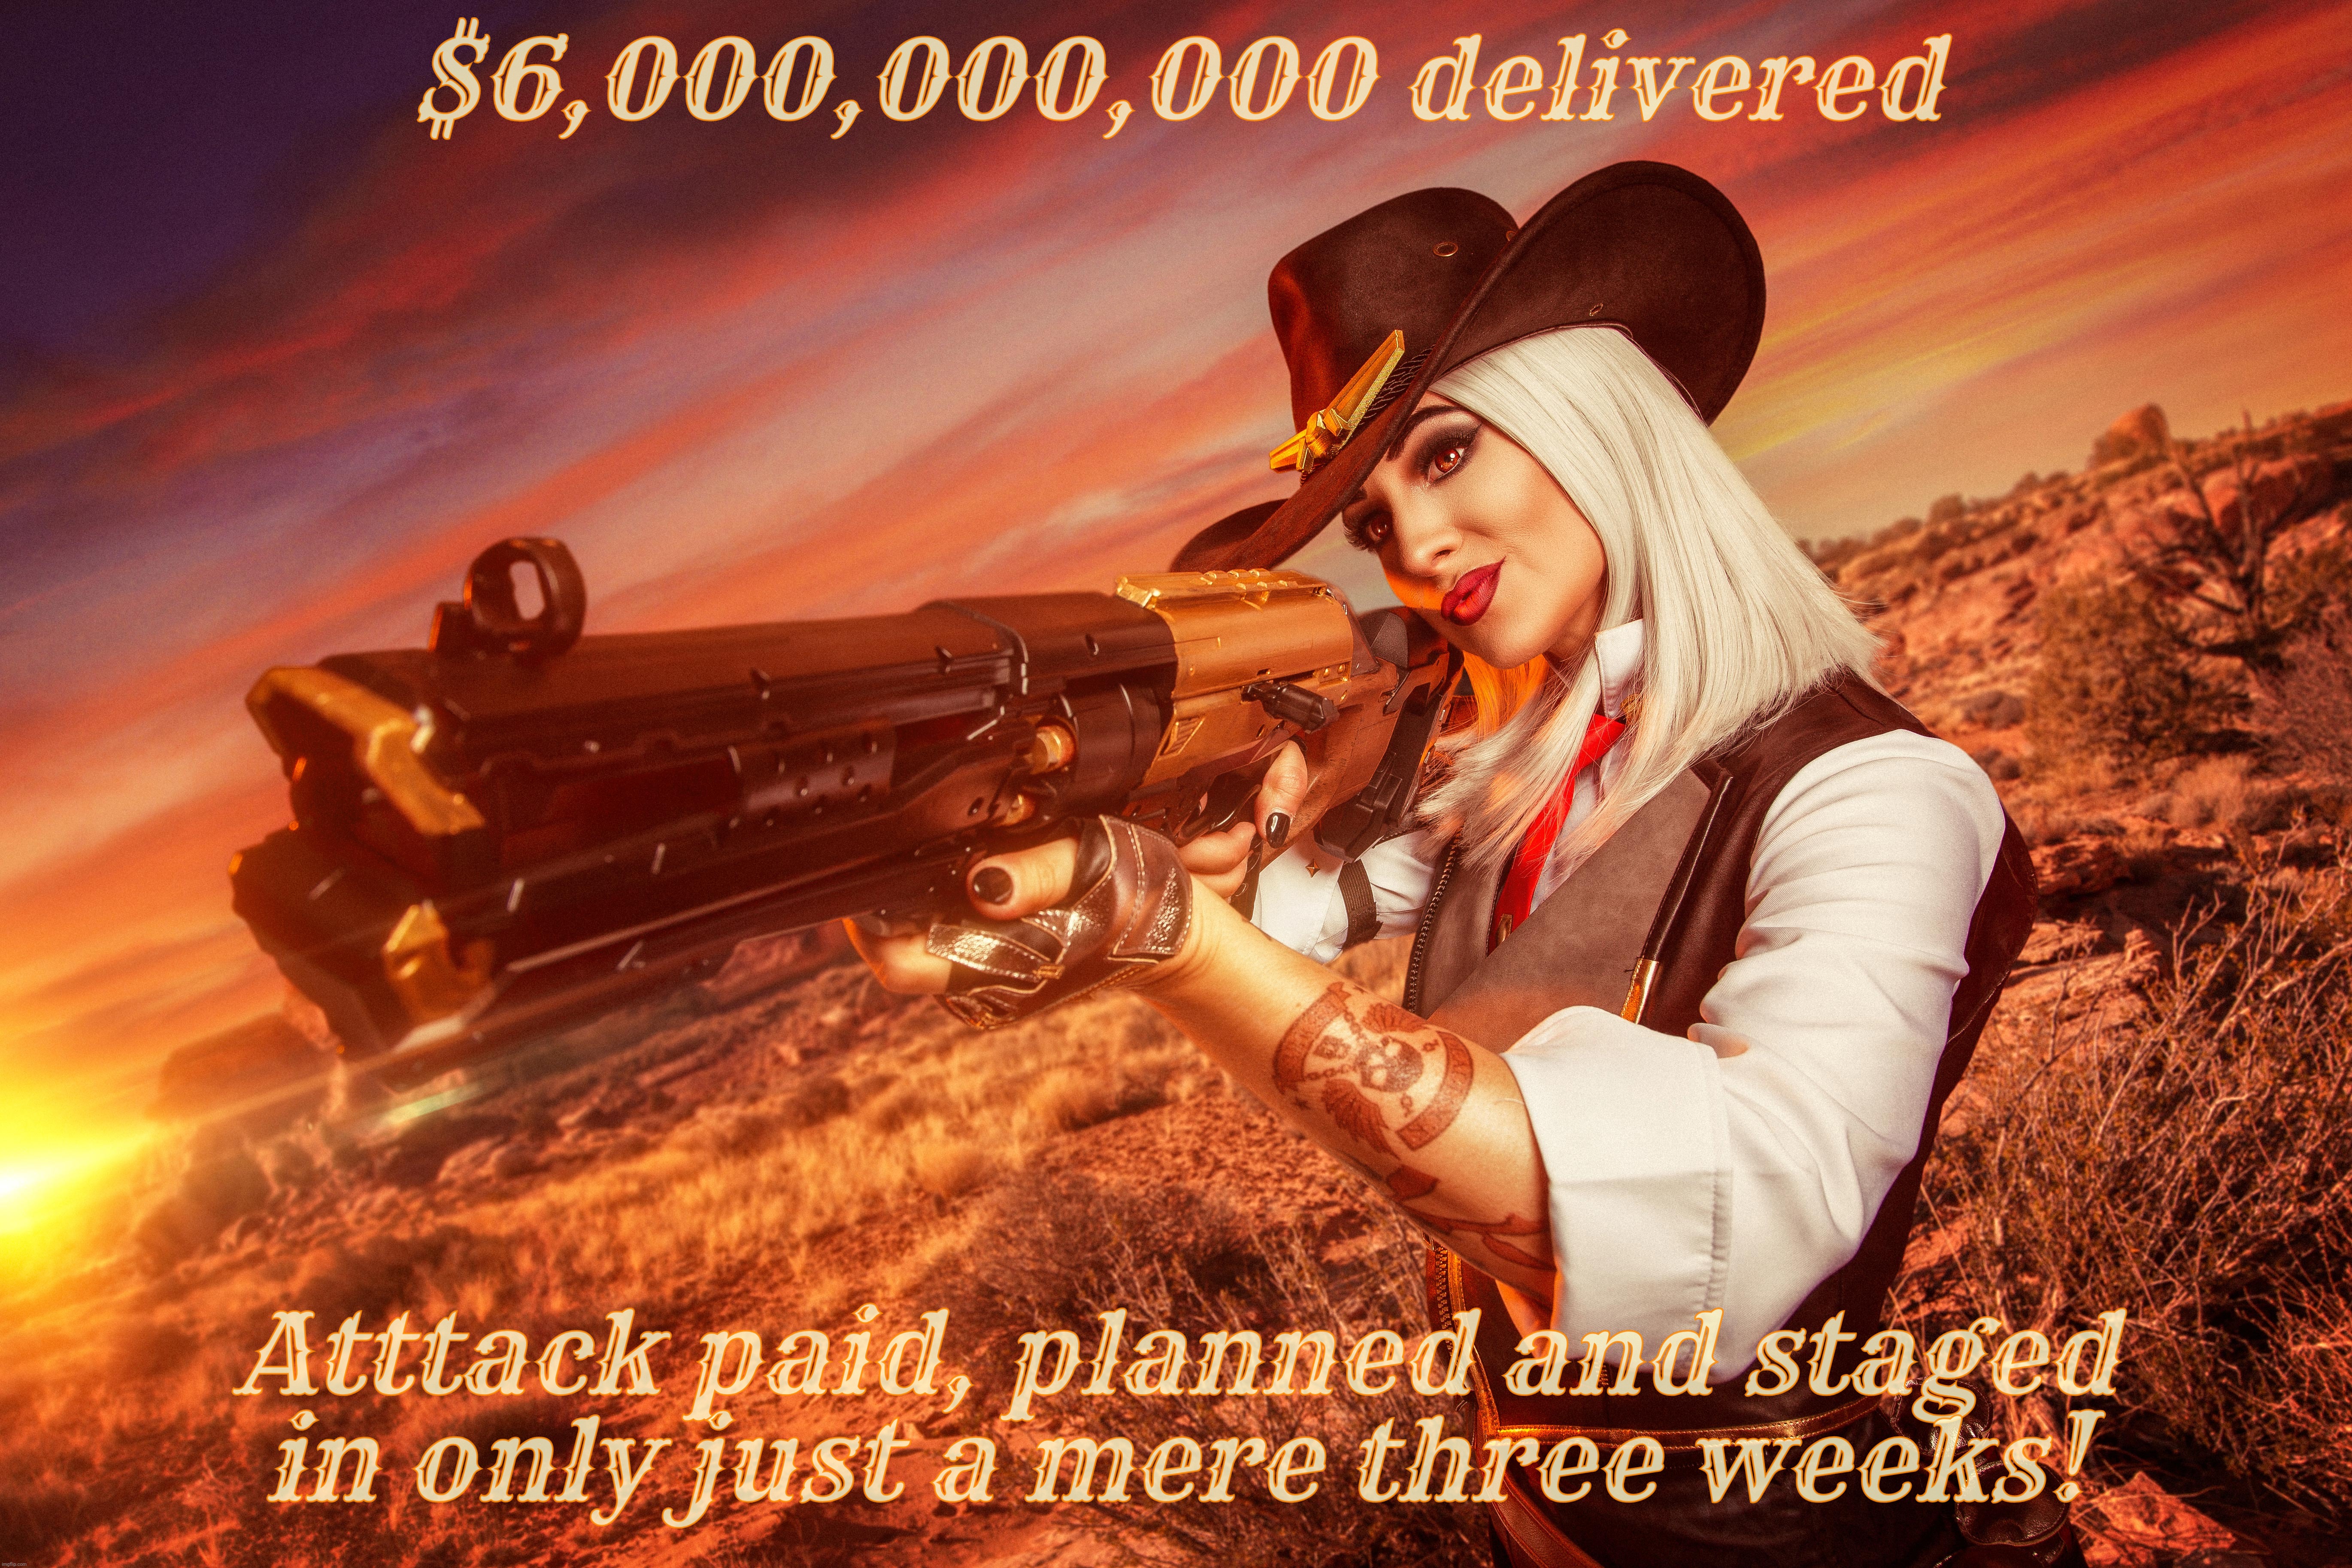 From Biden to Iran to Hamas to the news in only 3 weeks! Gazpacho Politics brings you war at Xbox speeds! | $6,000,000,000 delivered; Atttack paid, planned and staged
in only just a mere three weeks! | image tagged in ana de armas,maybe,ashe,ashe from overwatch,hamas terrorist attack,stop murdering people | made w/ Imgflip meme maker